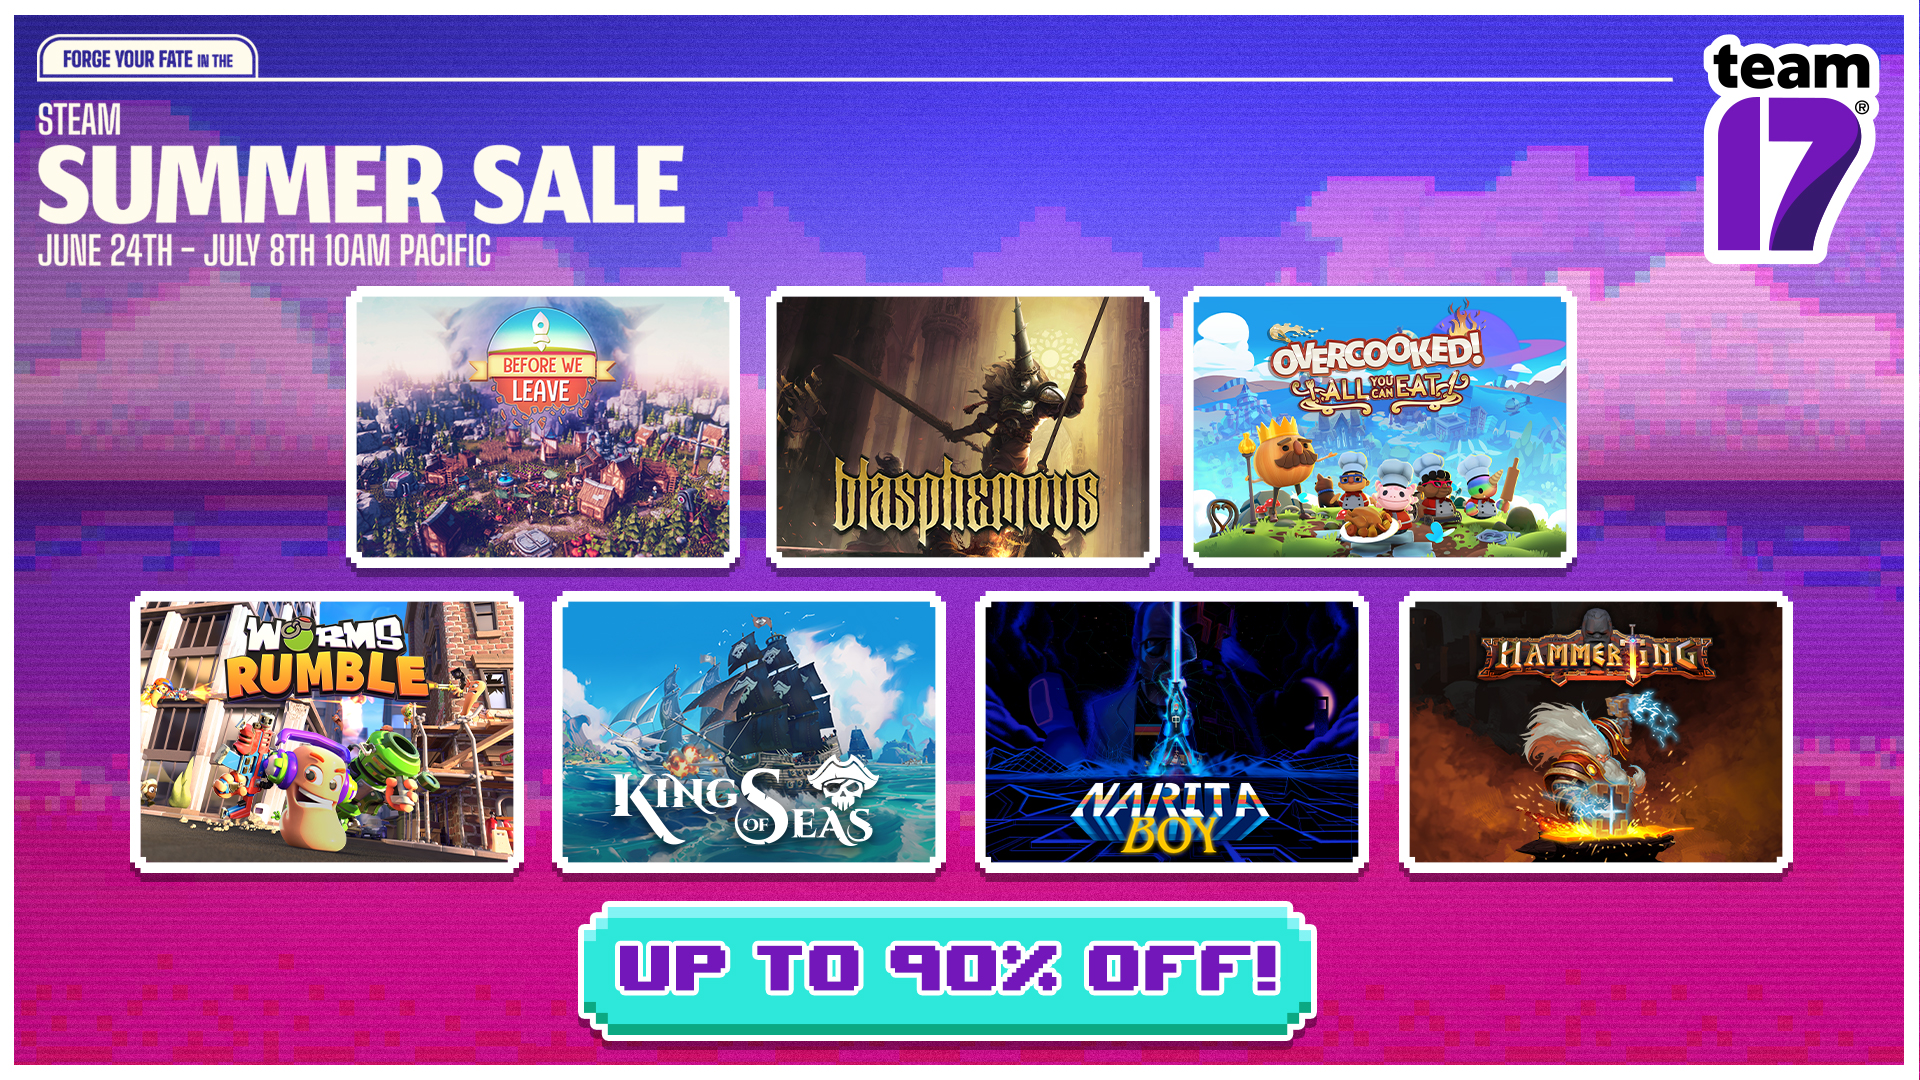 The Steam Summer Sale is heating up! Save up to 90 on Team17 games